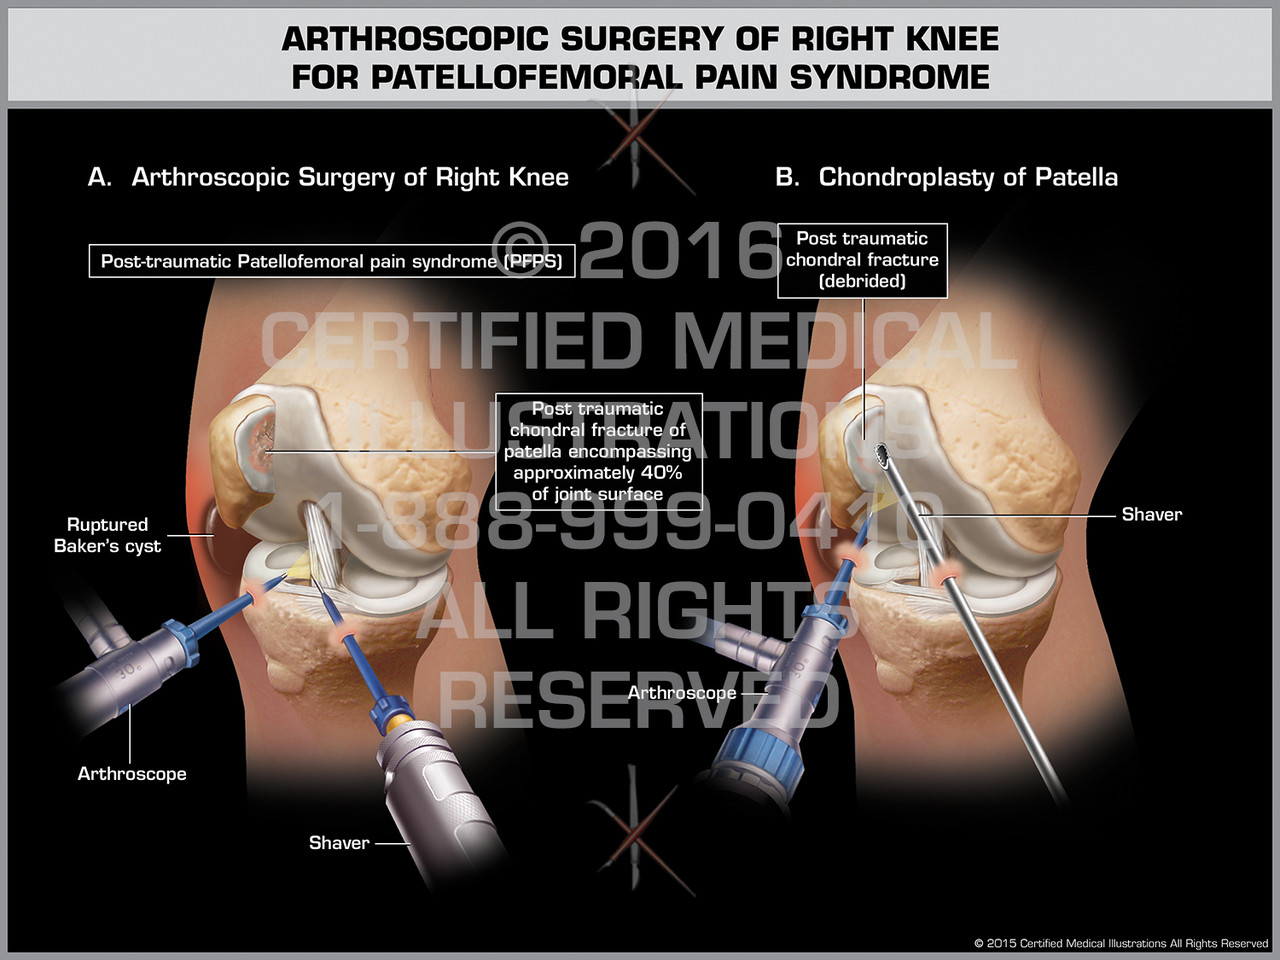 Arthroscopic Surgery of Right Knee for Patellofemoral Pain